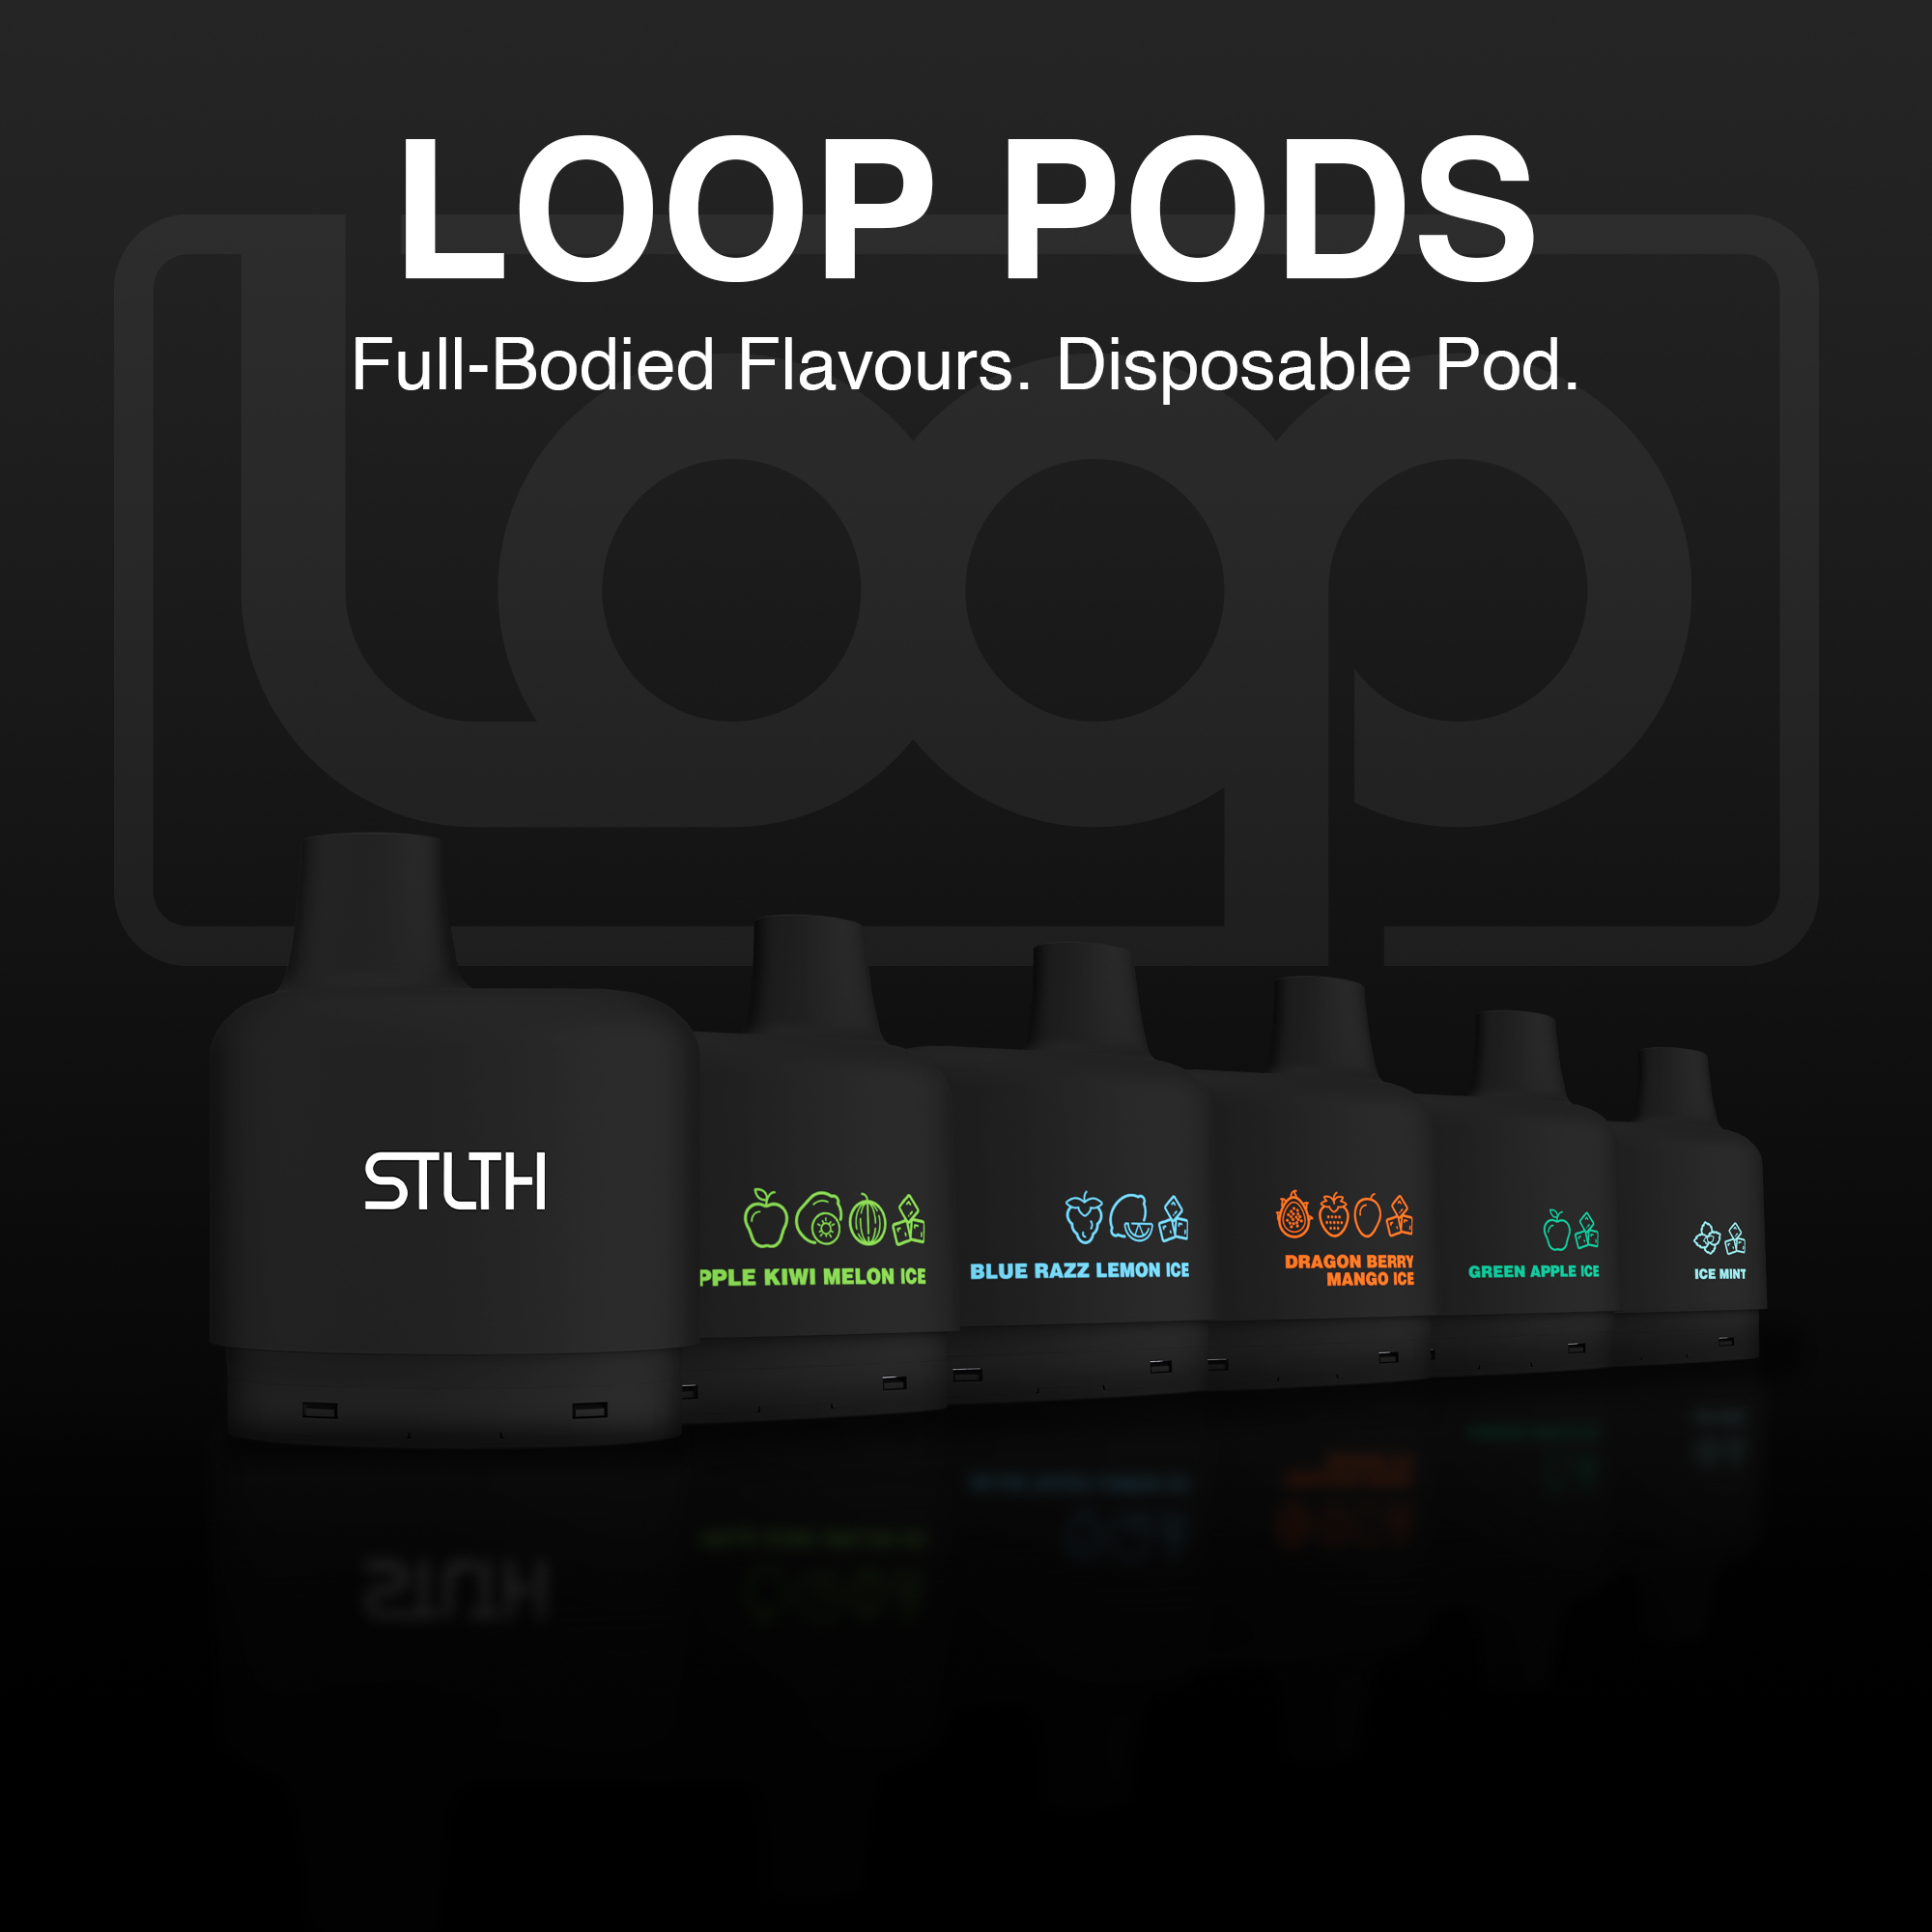 LOOP PODS: Full-Bodied Flavours. Disposable Pod.